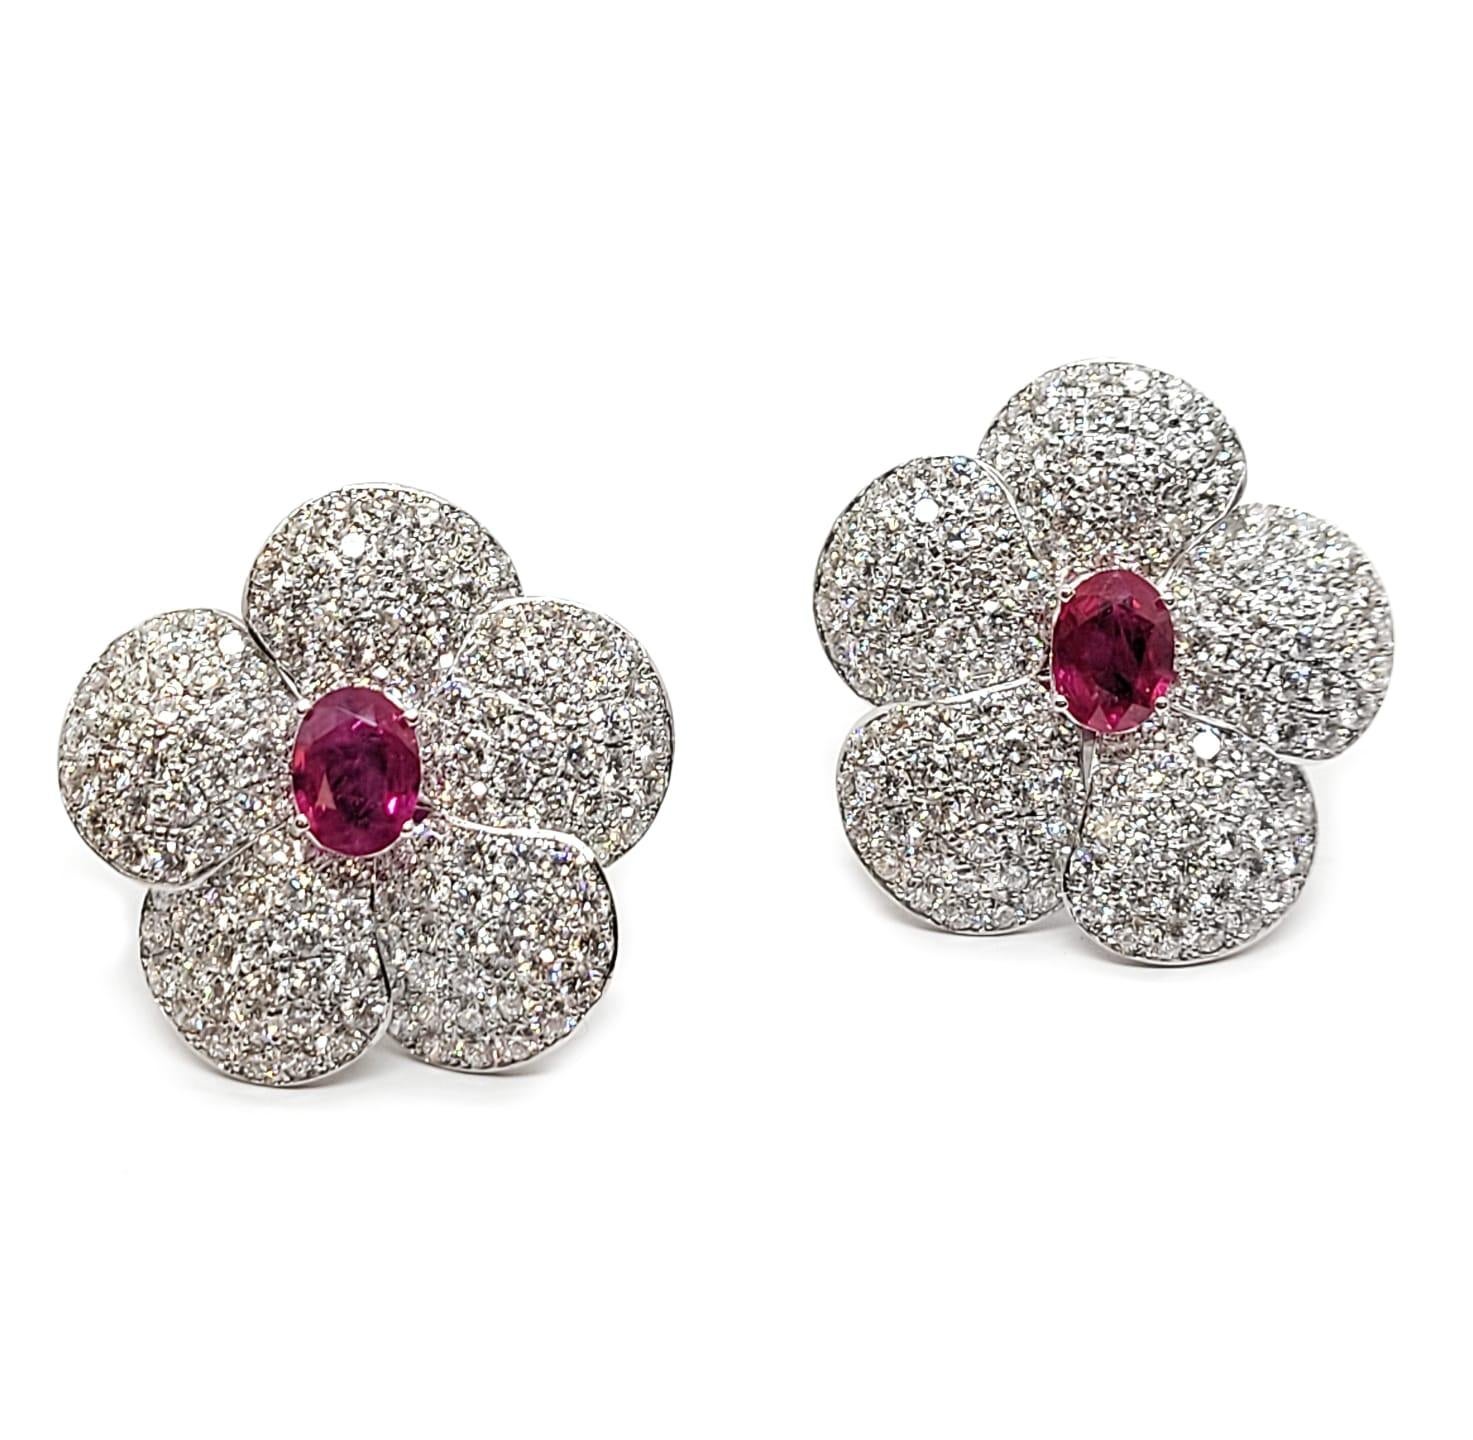 Contemporary Andreoli 2.32 Carat Ruby Diamond 18k White Gold Flower Earrings CDC Certified For Sale